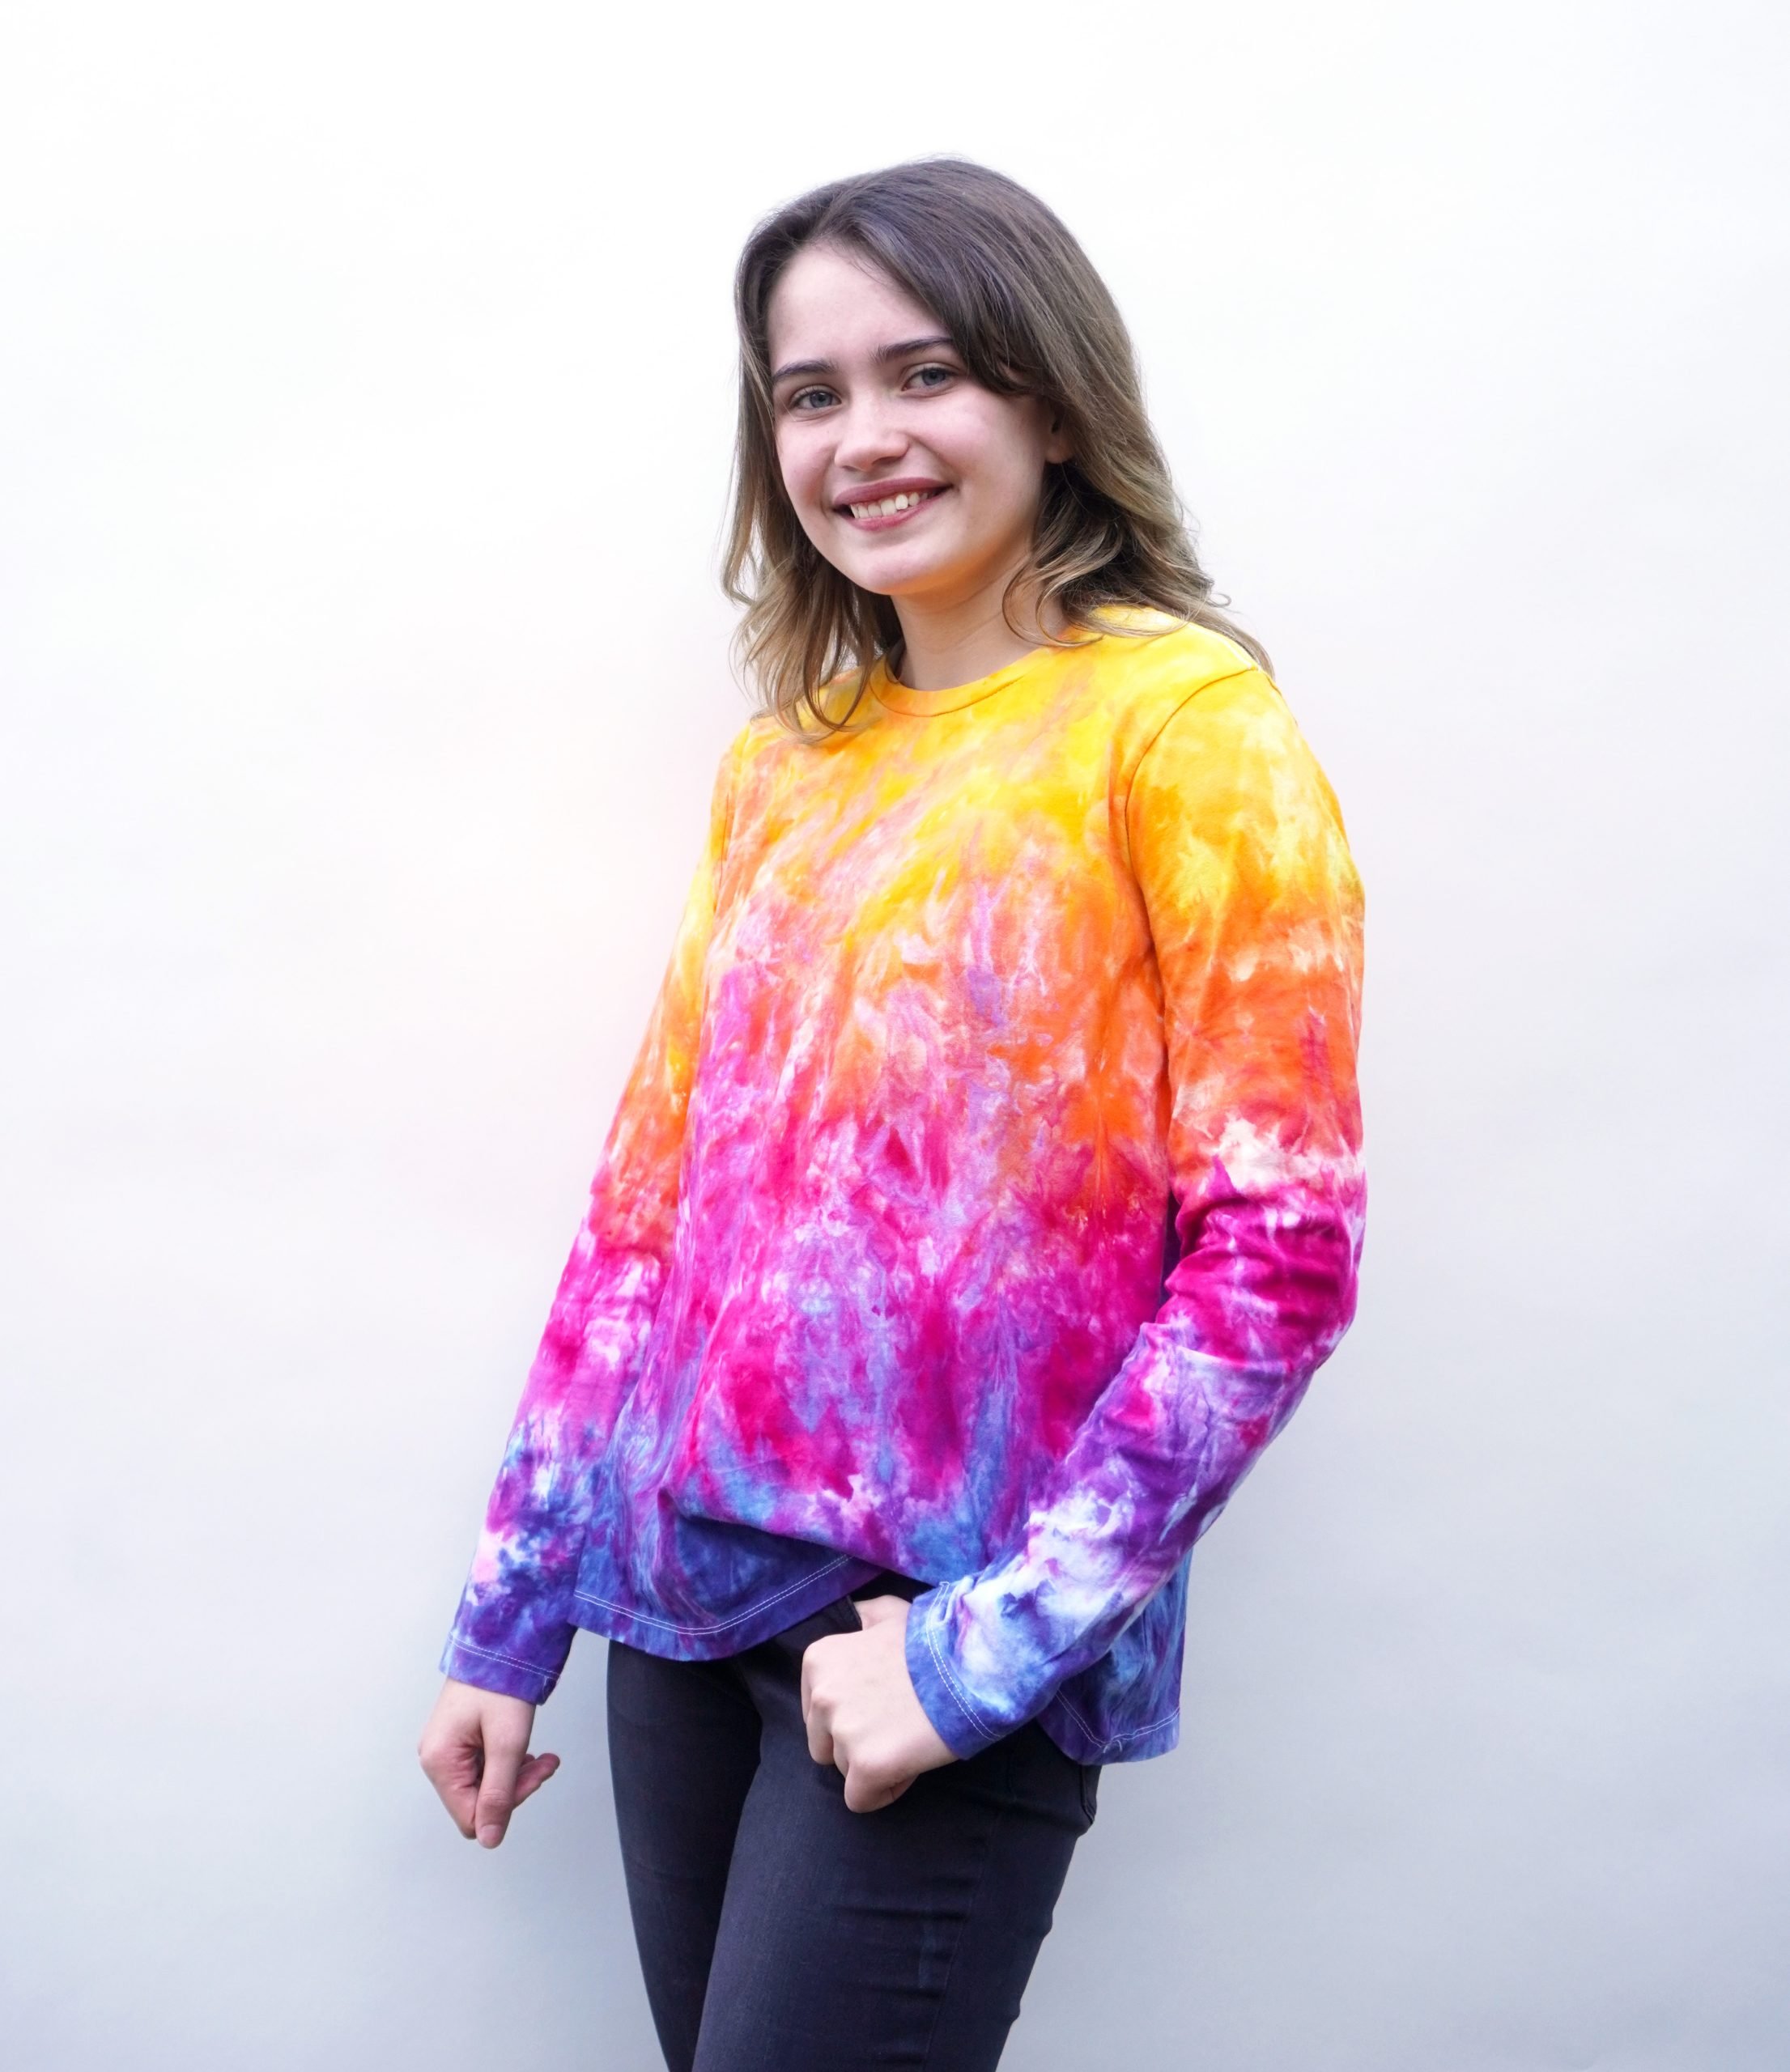 Teen girl wearing an ice-dyed tie dye shirt in rainbow sunset colors